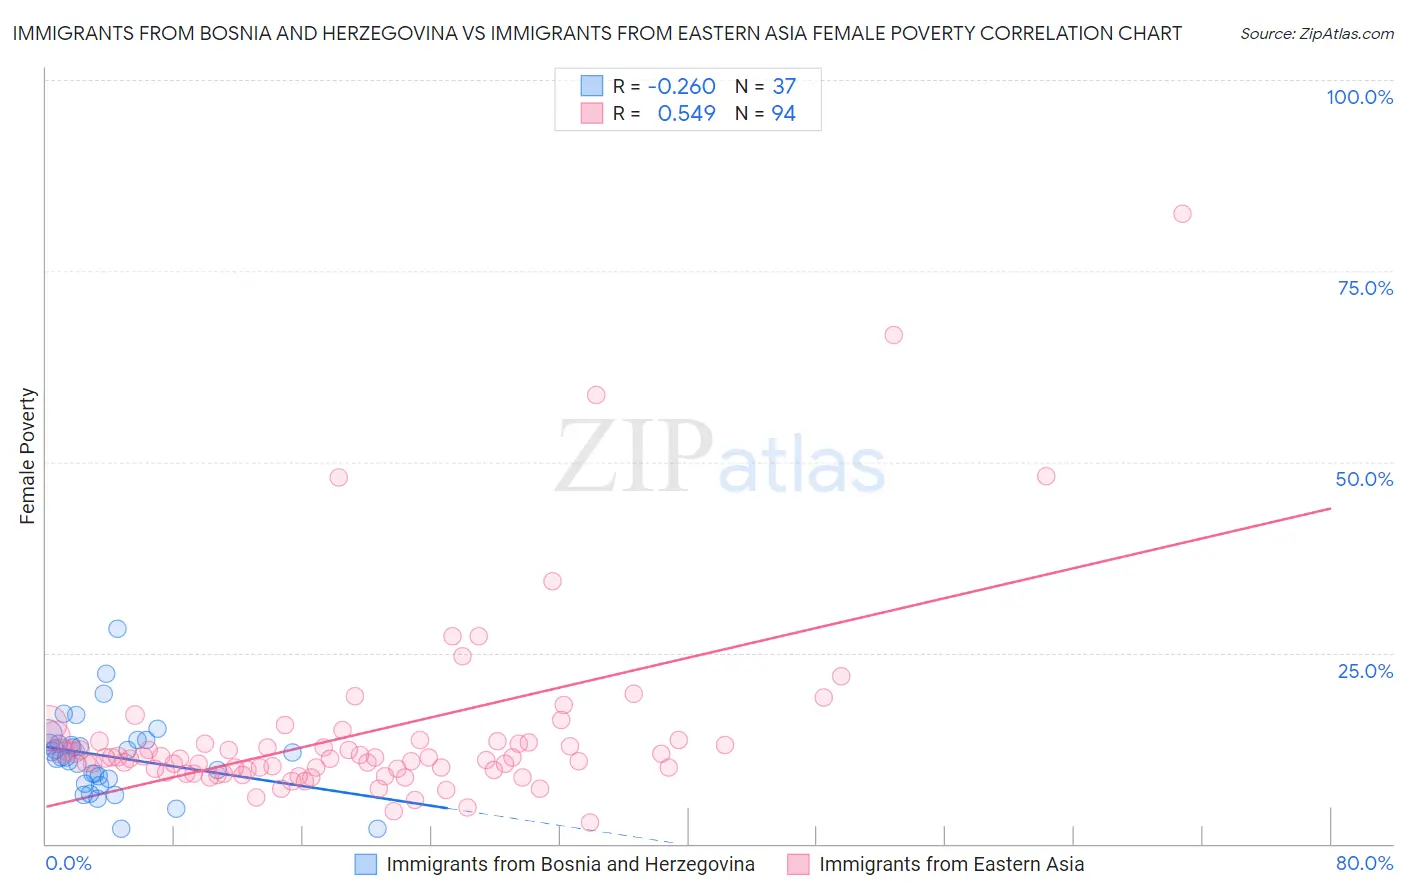 Immigrants from Bosnia and Herzegovina vs Immigrants from Eastern Asia Female Poverty